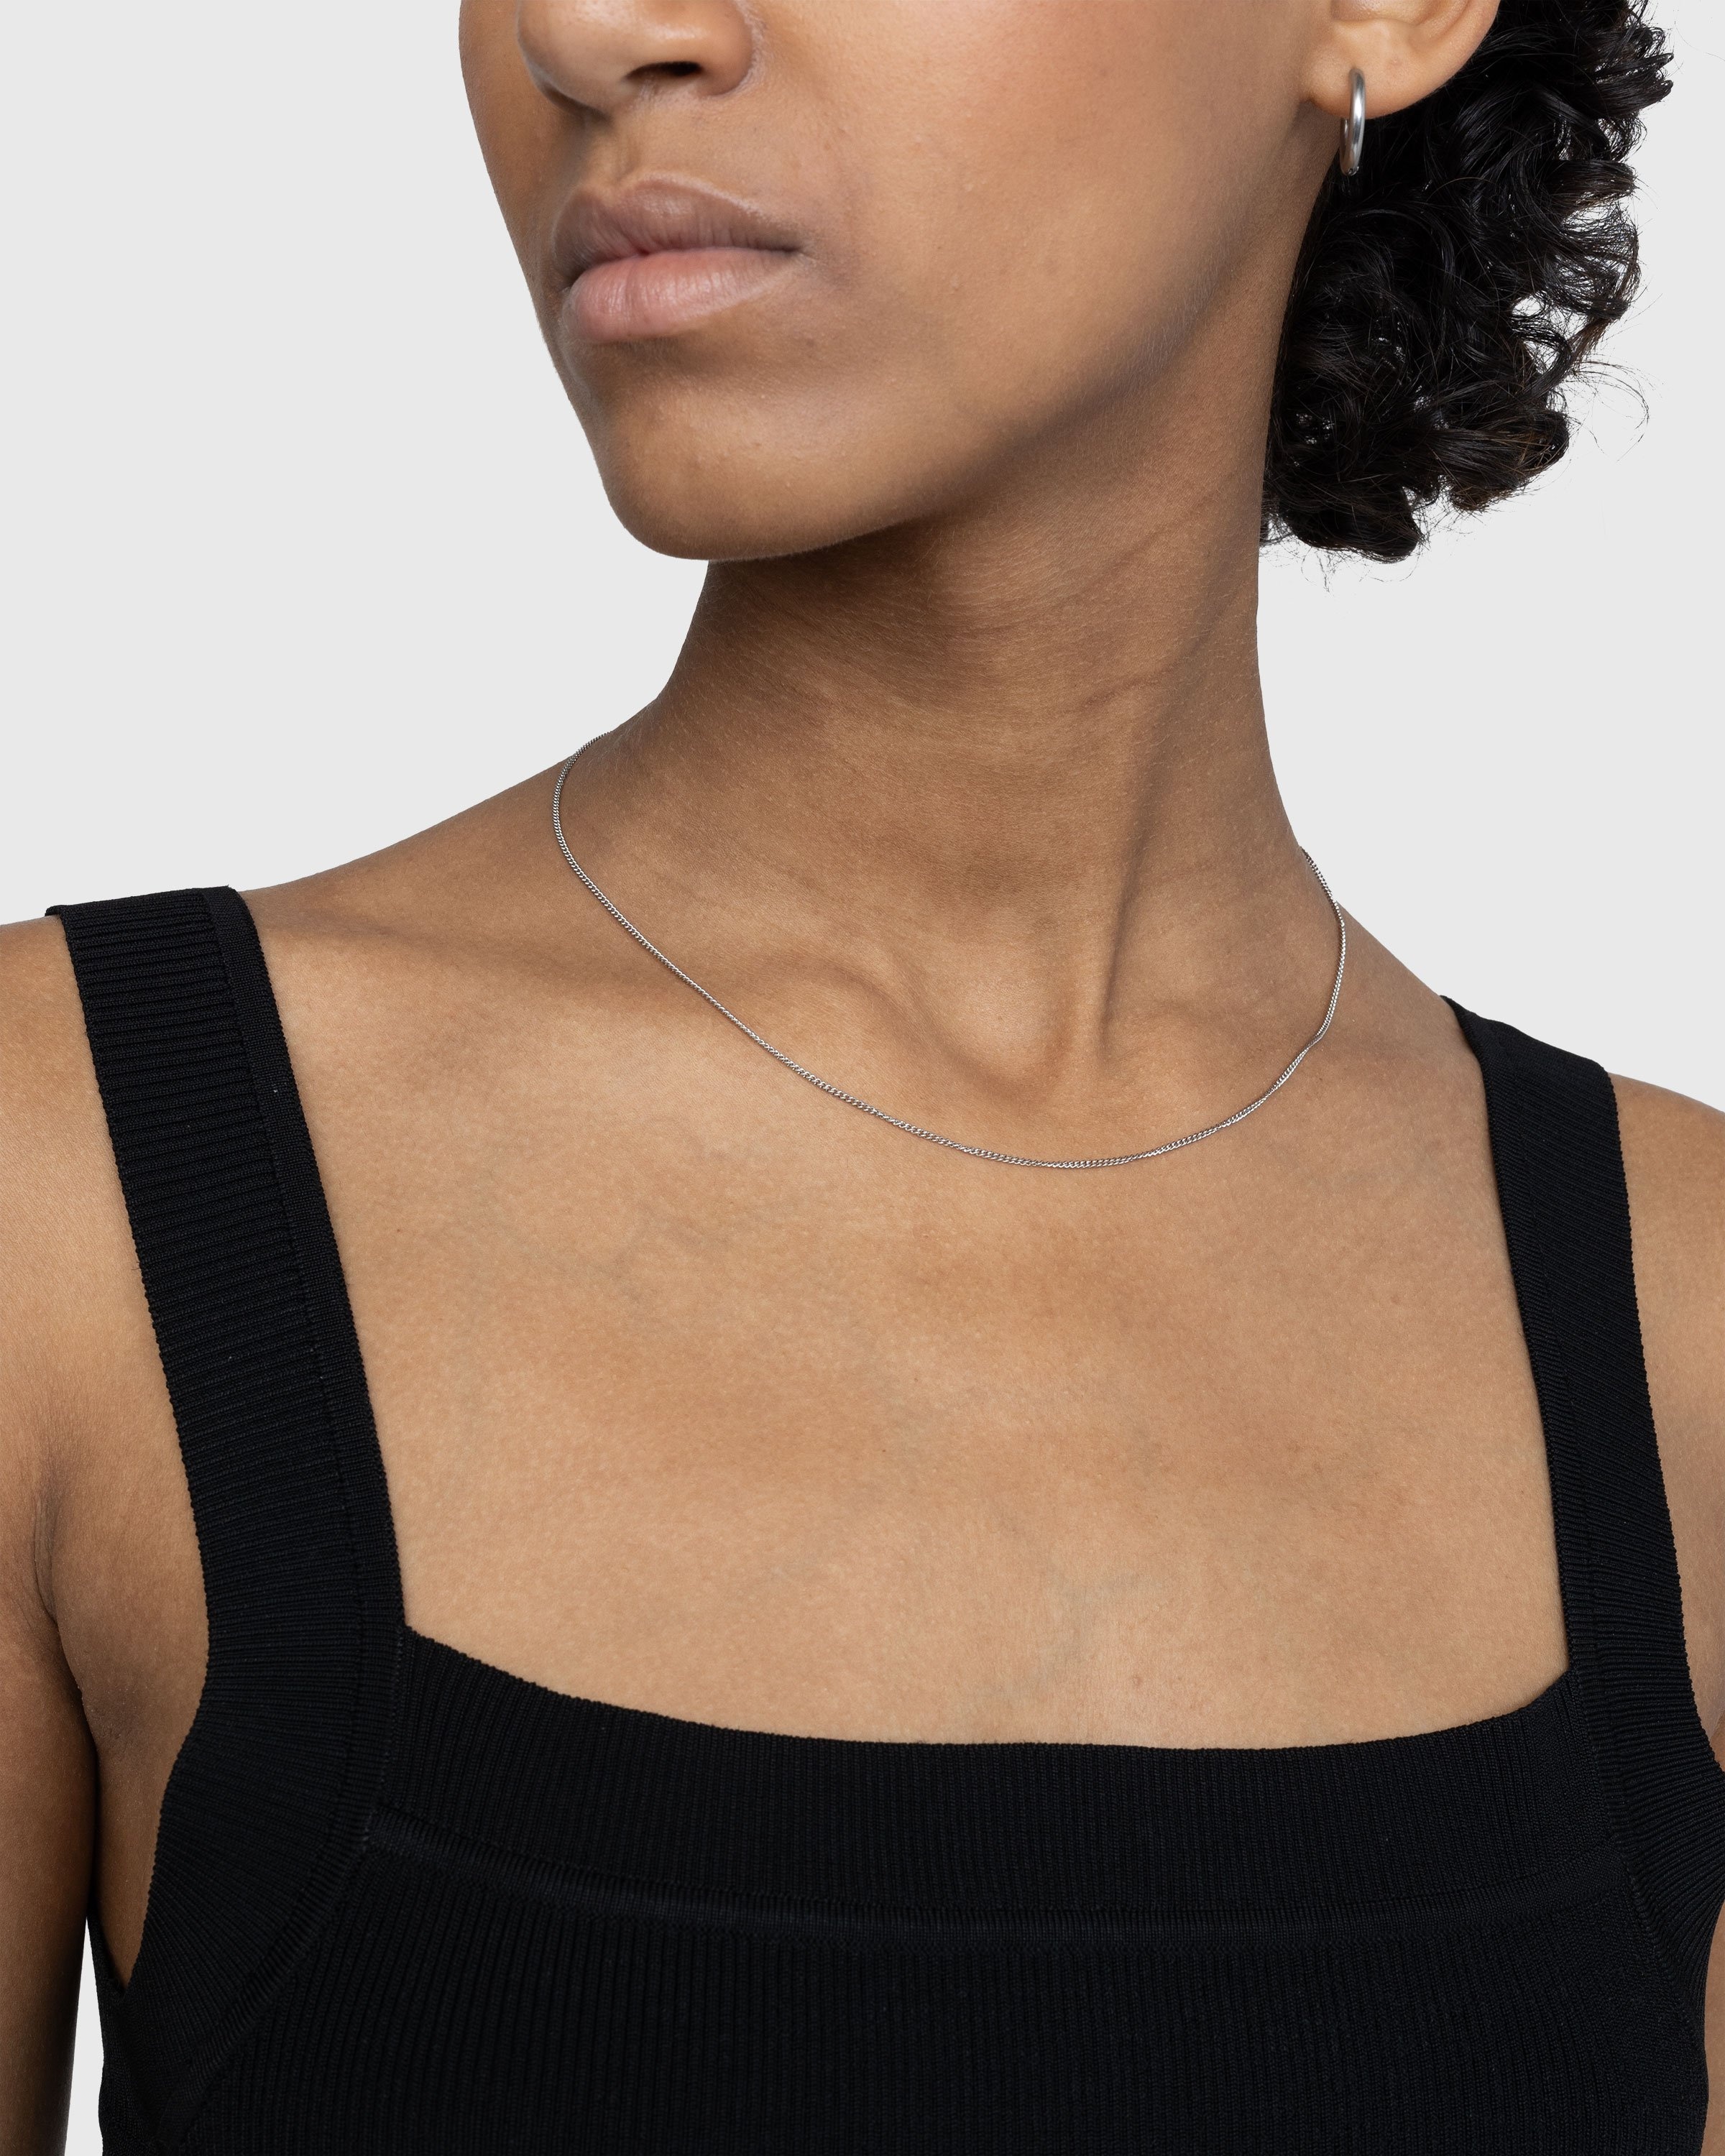 Dries van Noten – Logo Tag Necklace Silver - Jewelry - Silver - Image 3